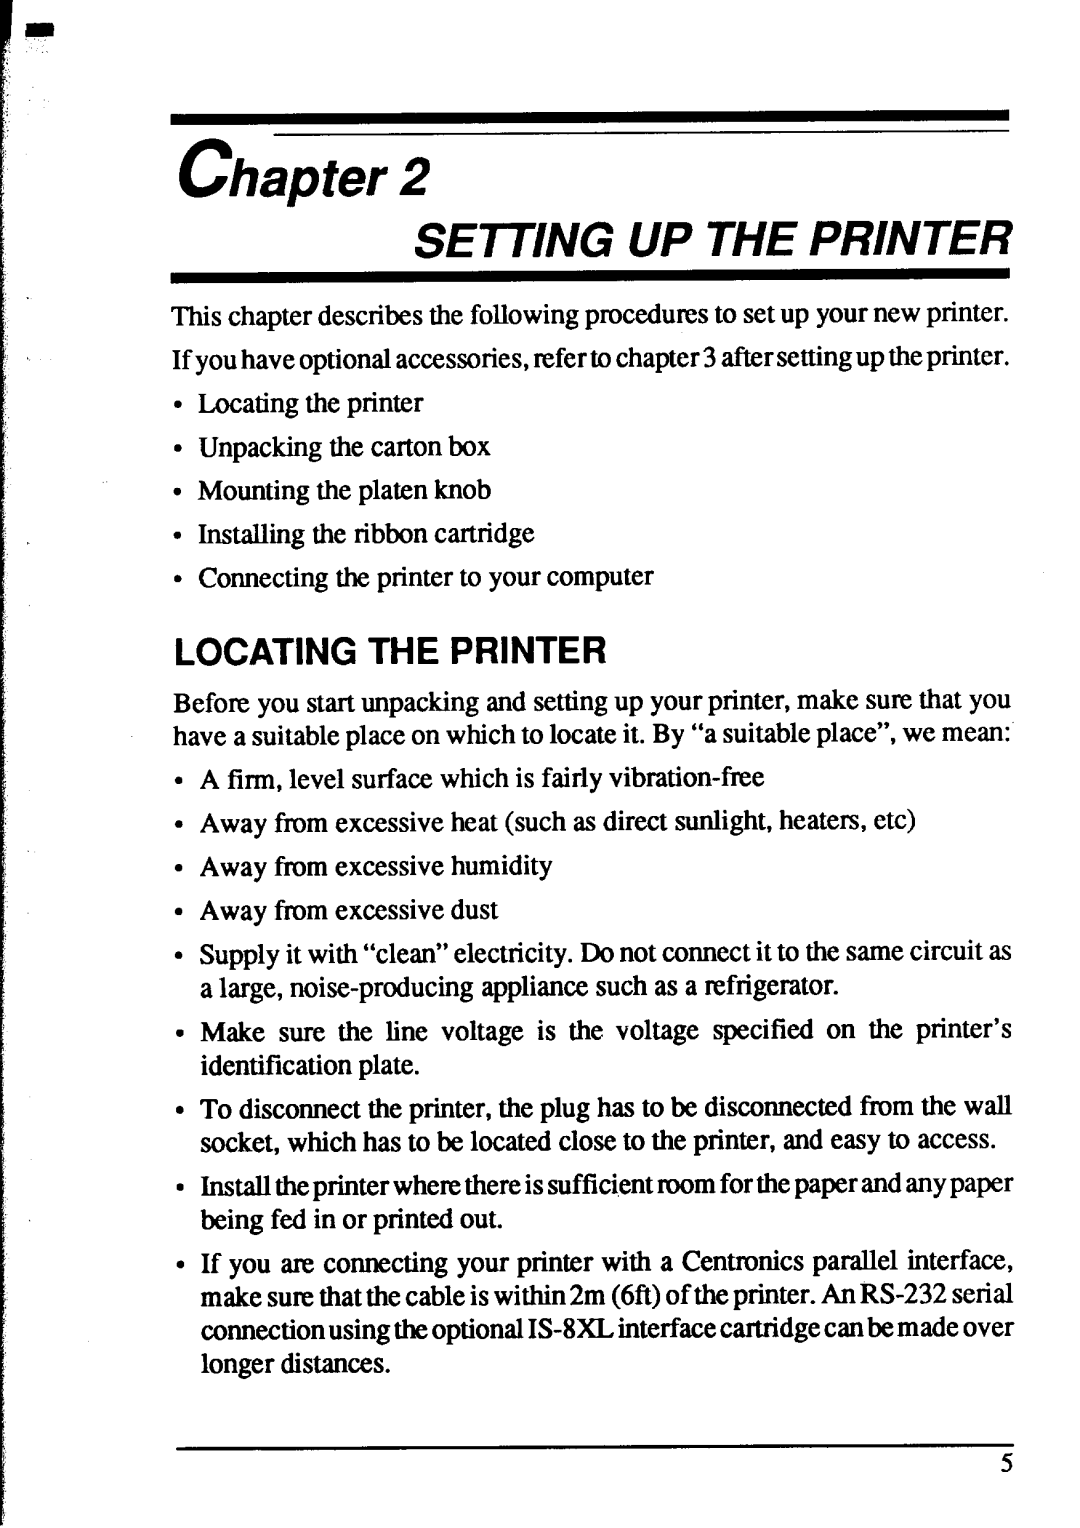 Star Micronics XR-1520, XR-1020 manual chapter, Setting Up The Printer, Locating The Printer 